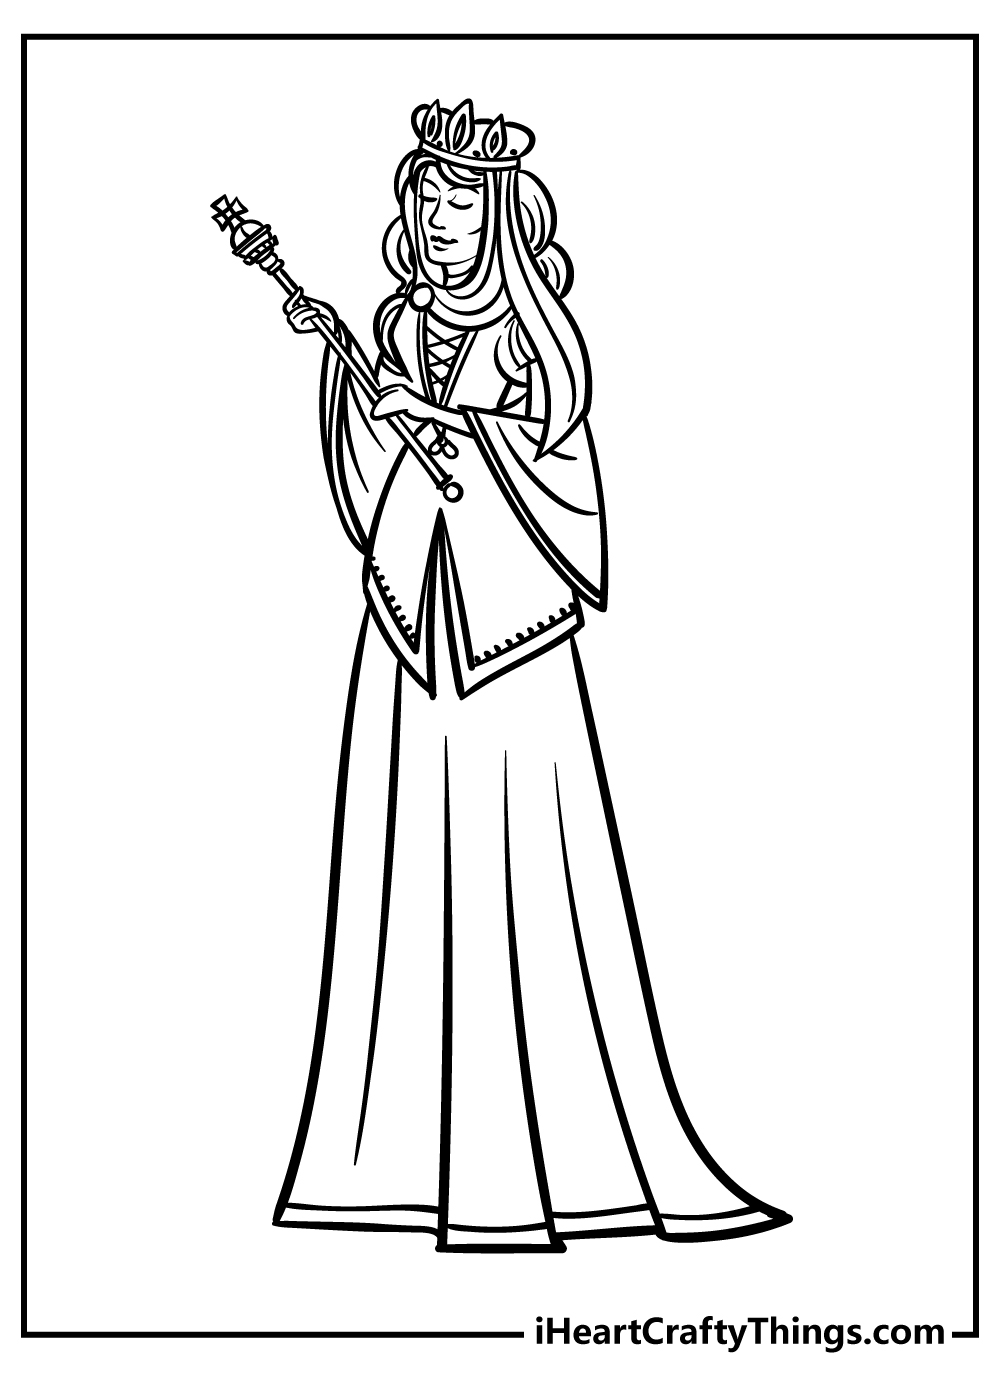 Queen Coloring Pages free pdf download